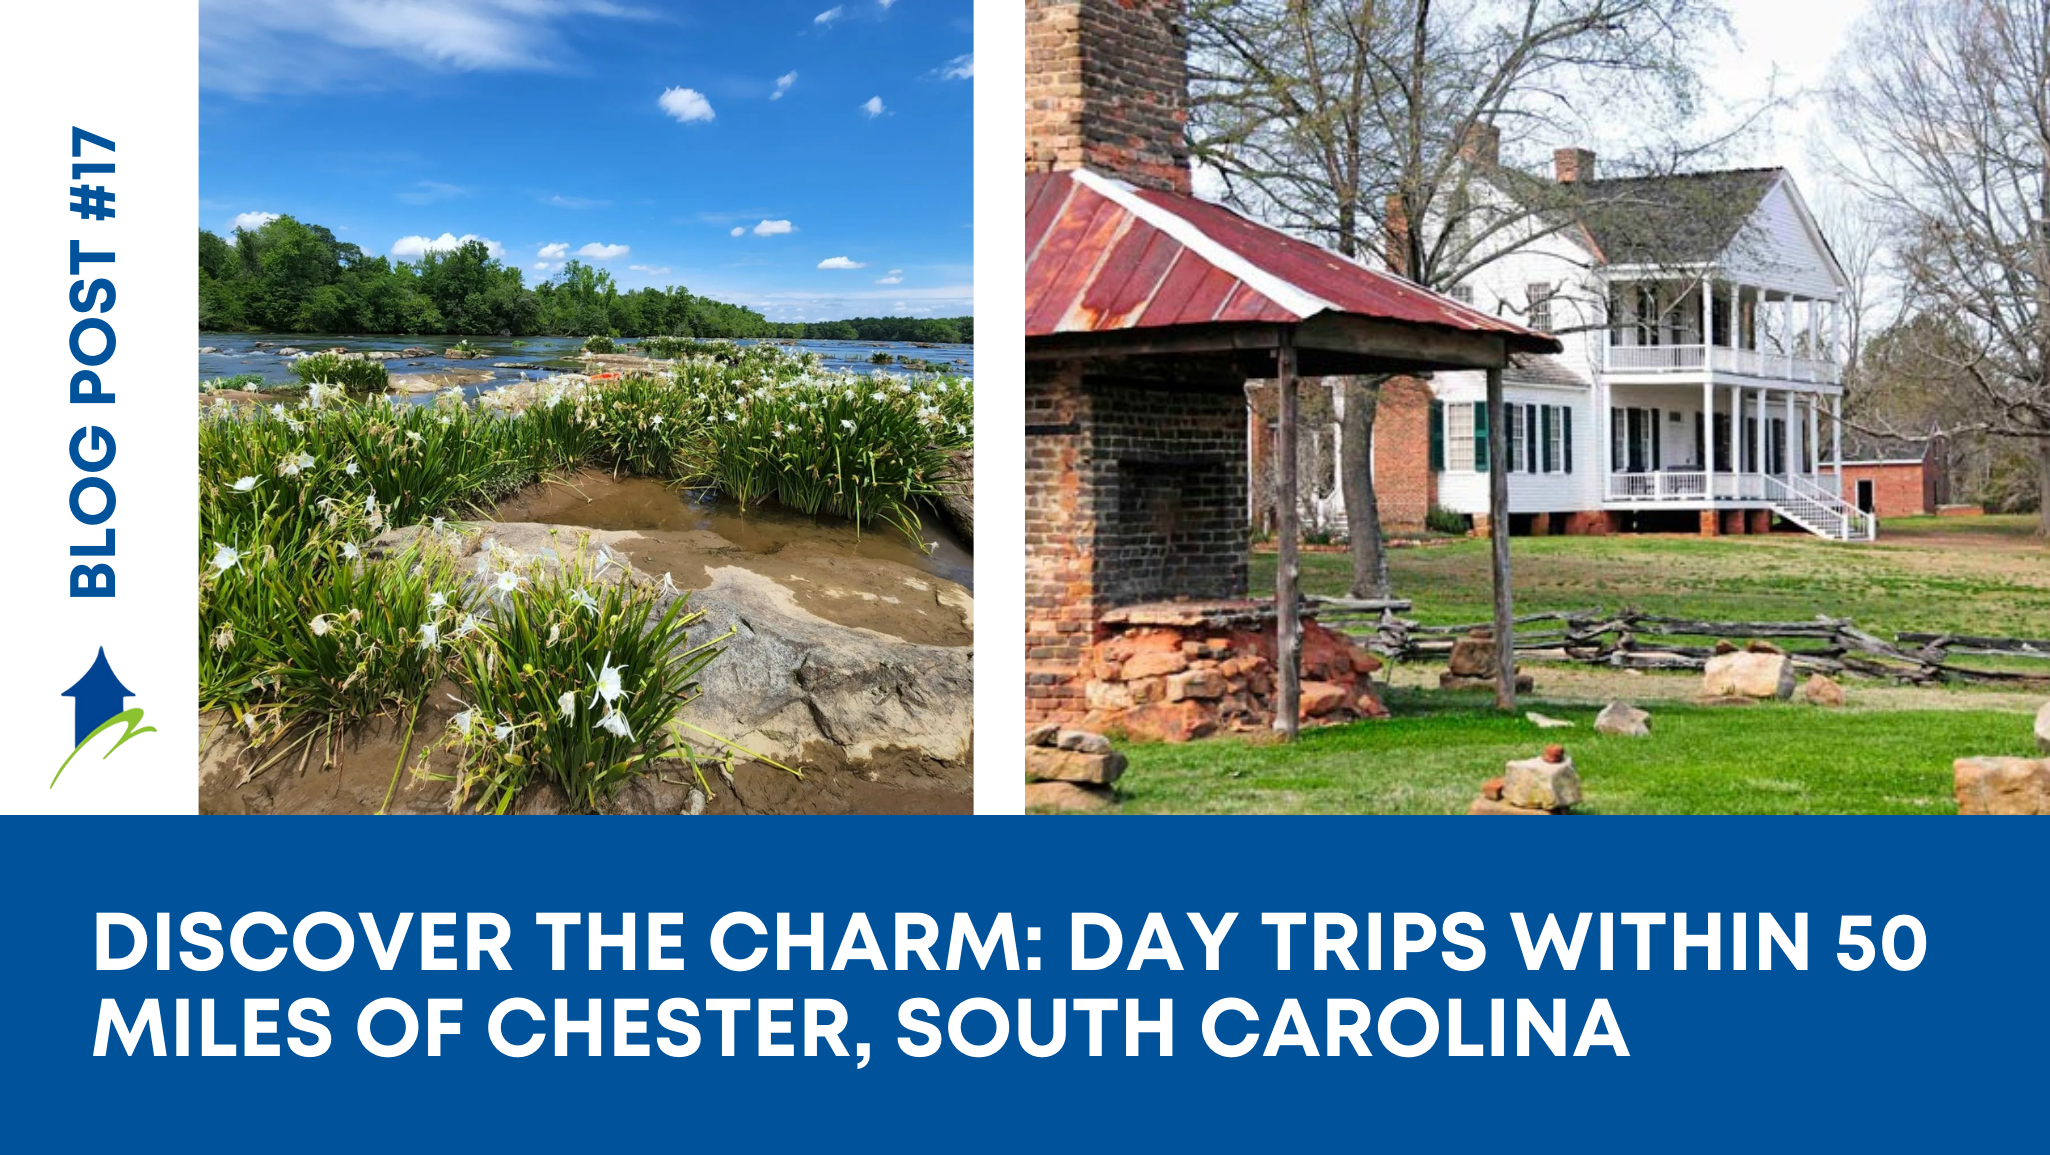 Discover the Charm: Day Trips Within 50 Miles of Chester, South Carolina